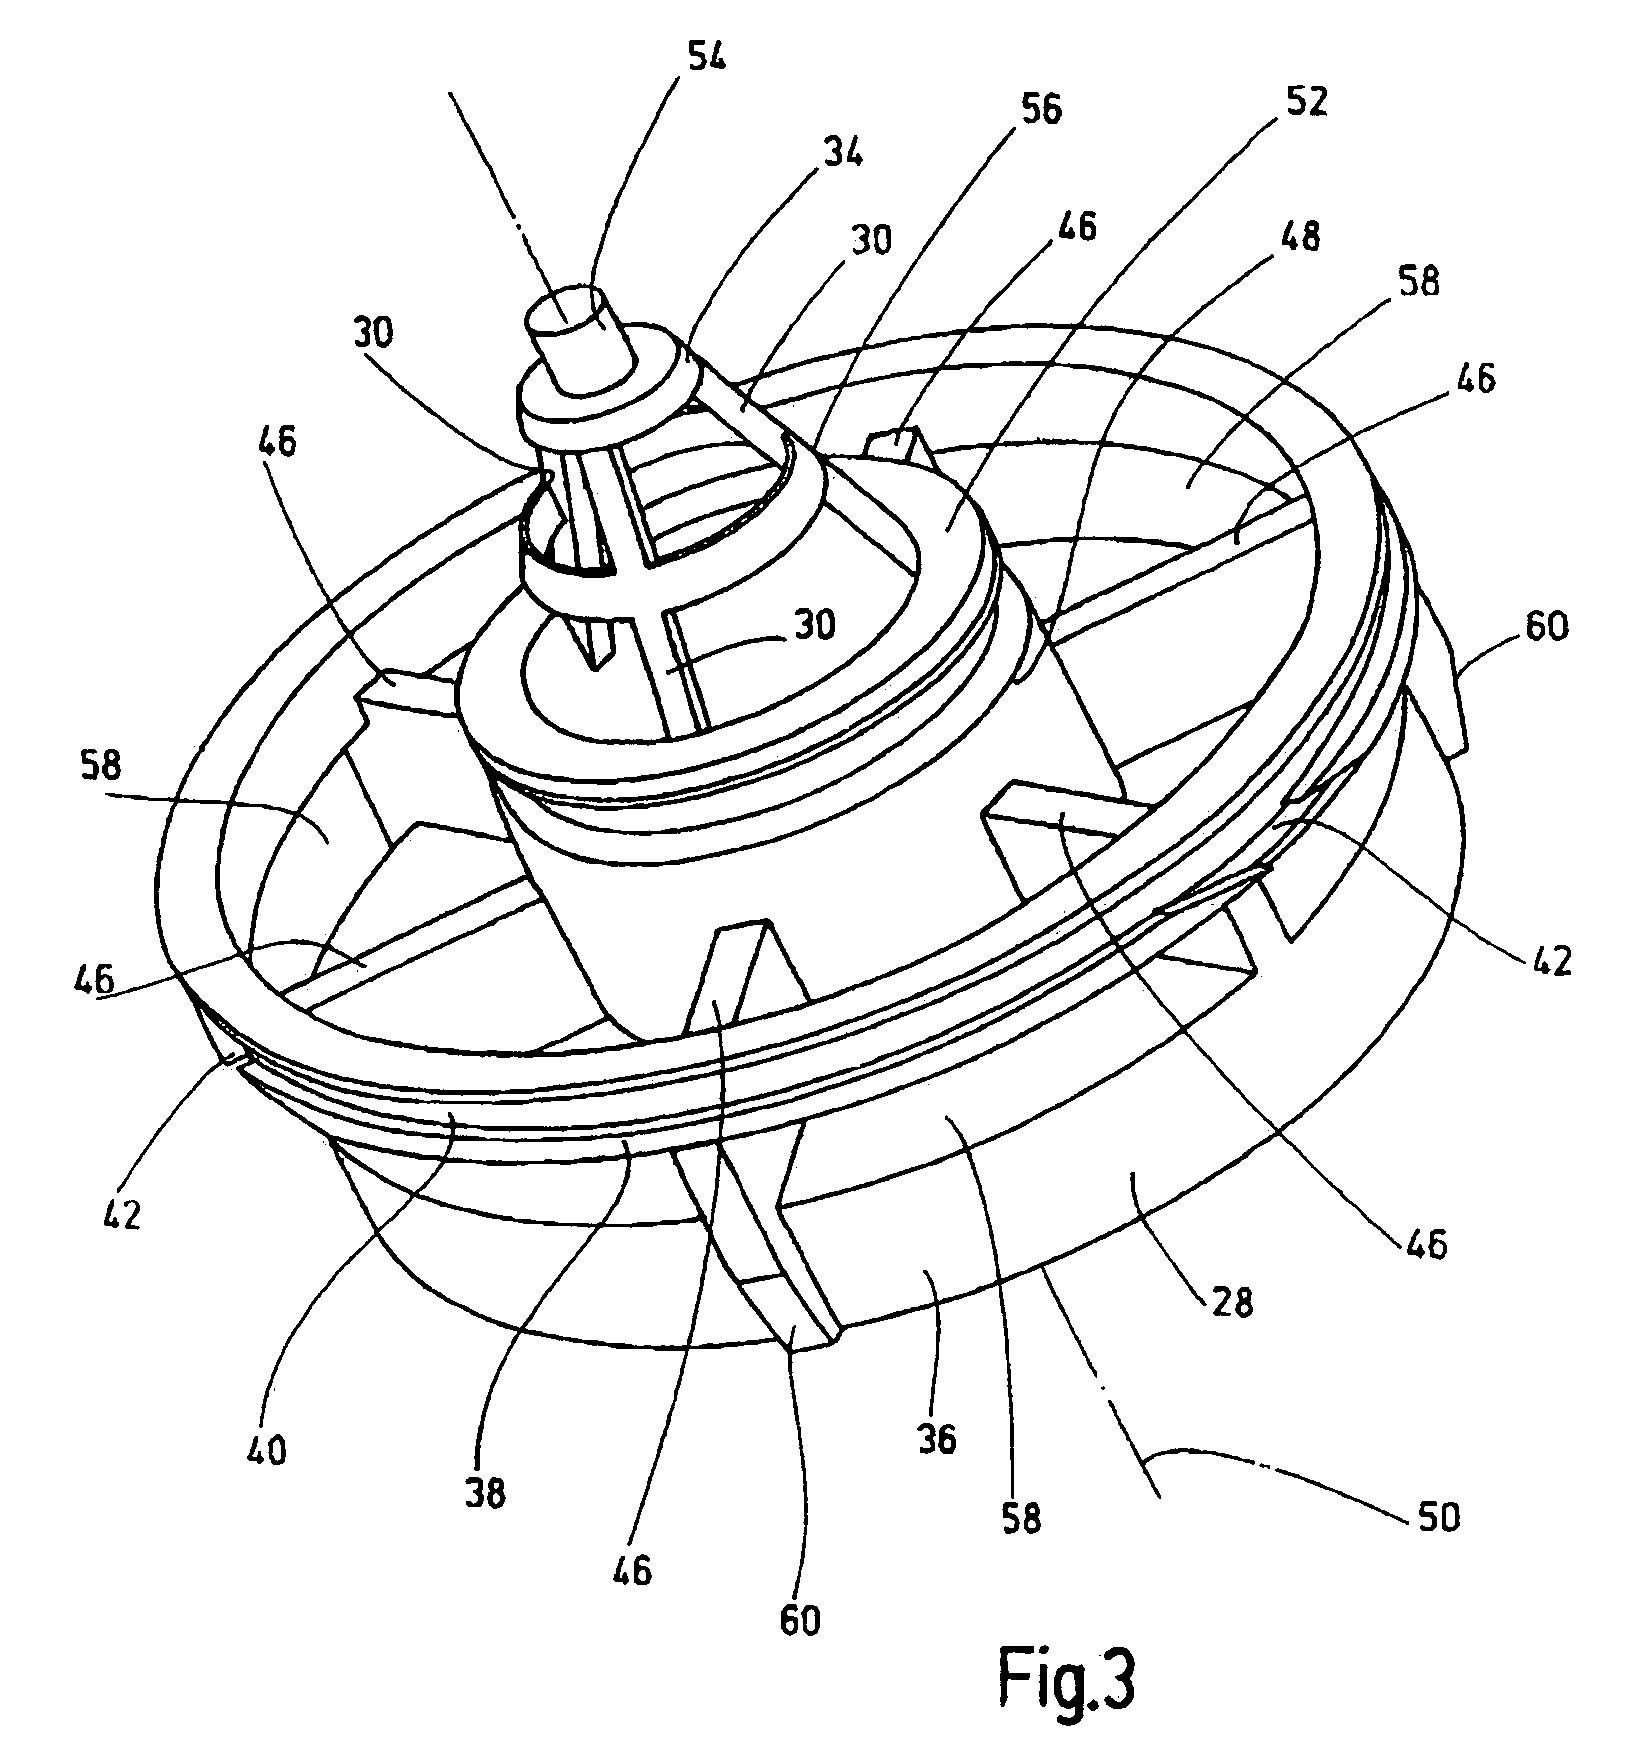 Filter device and parts thereof and a method for operating of the filter device